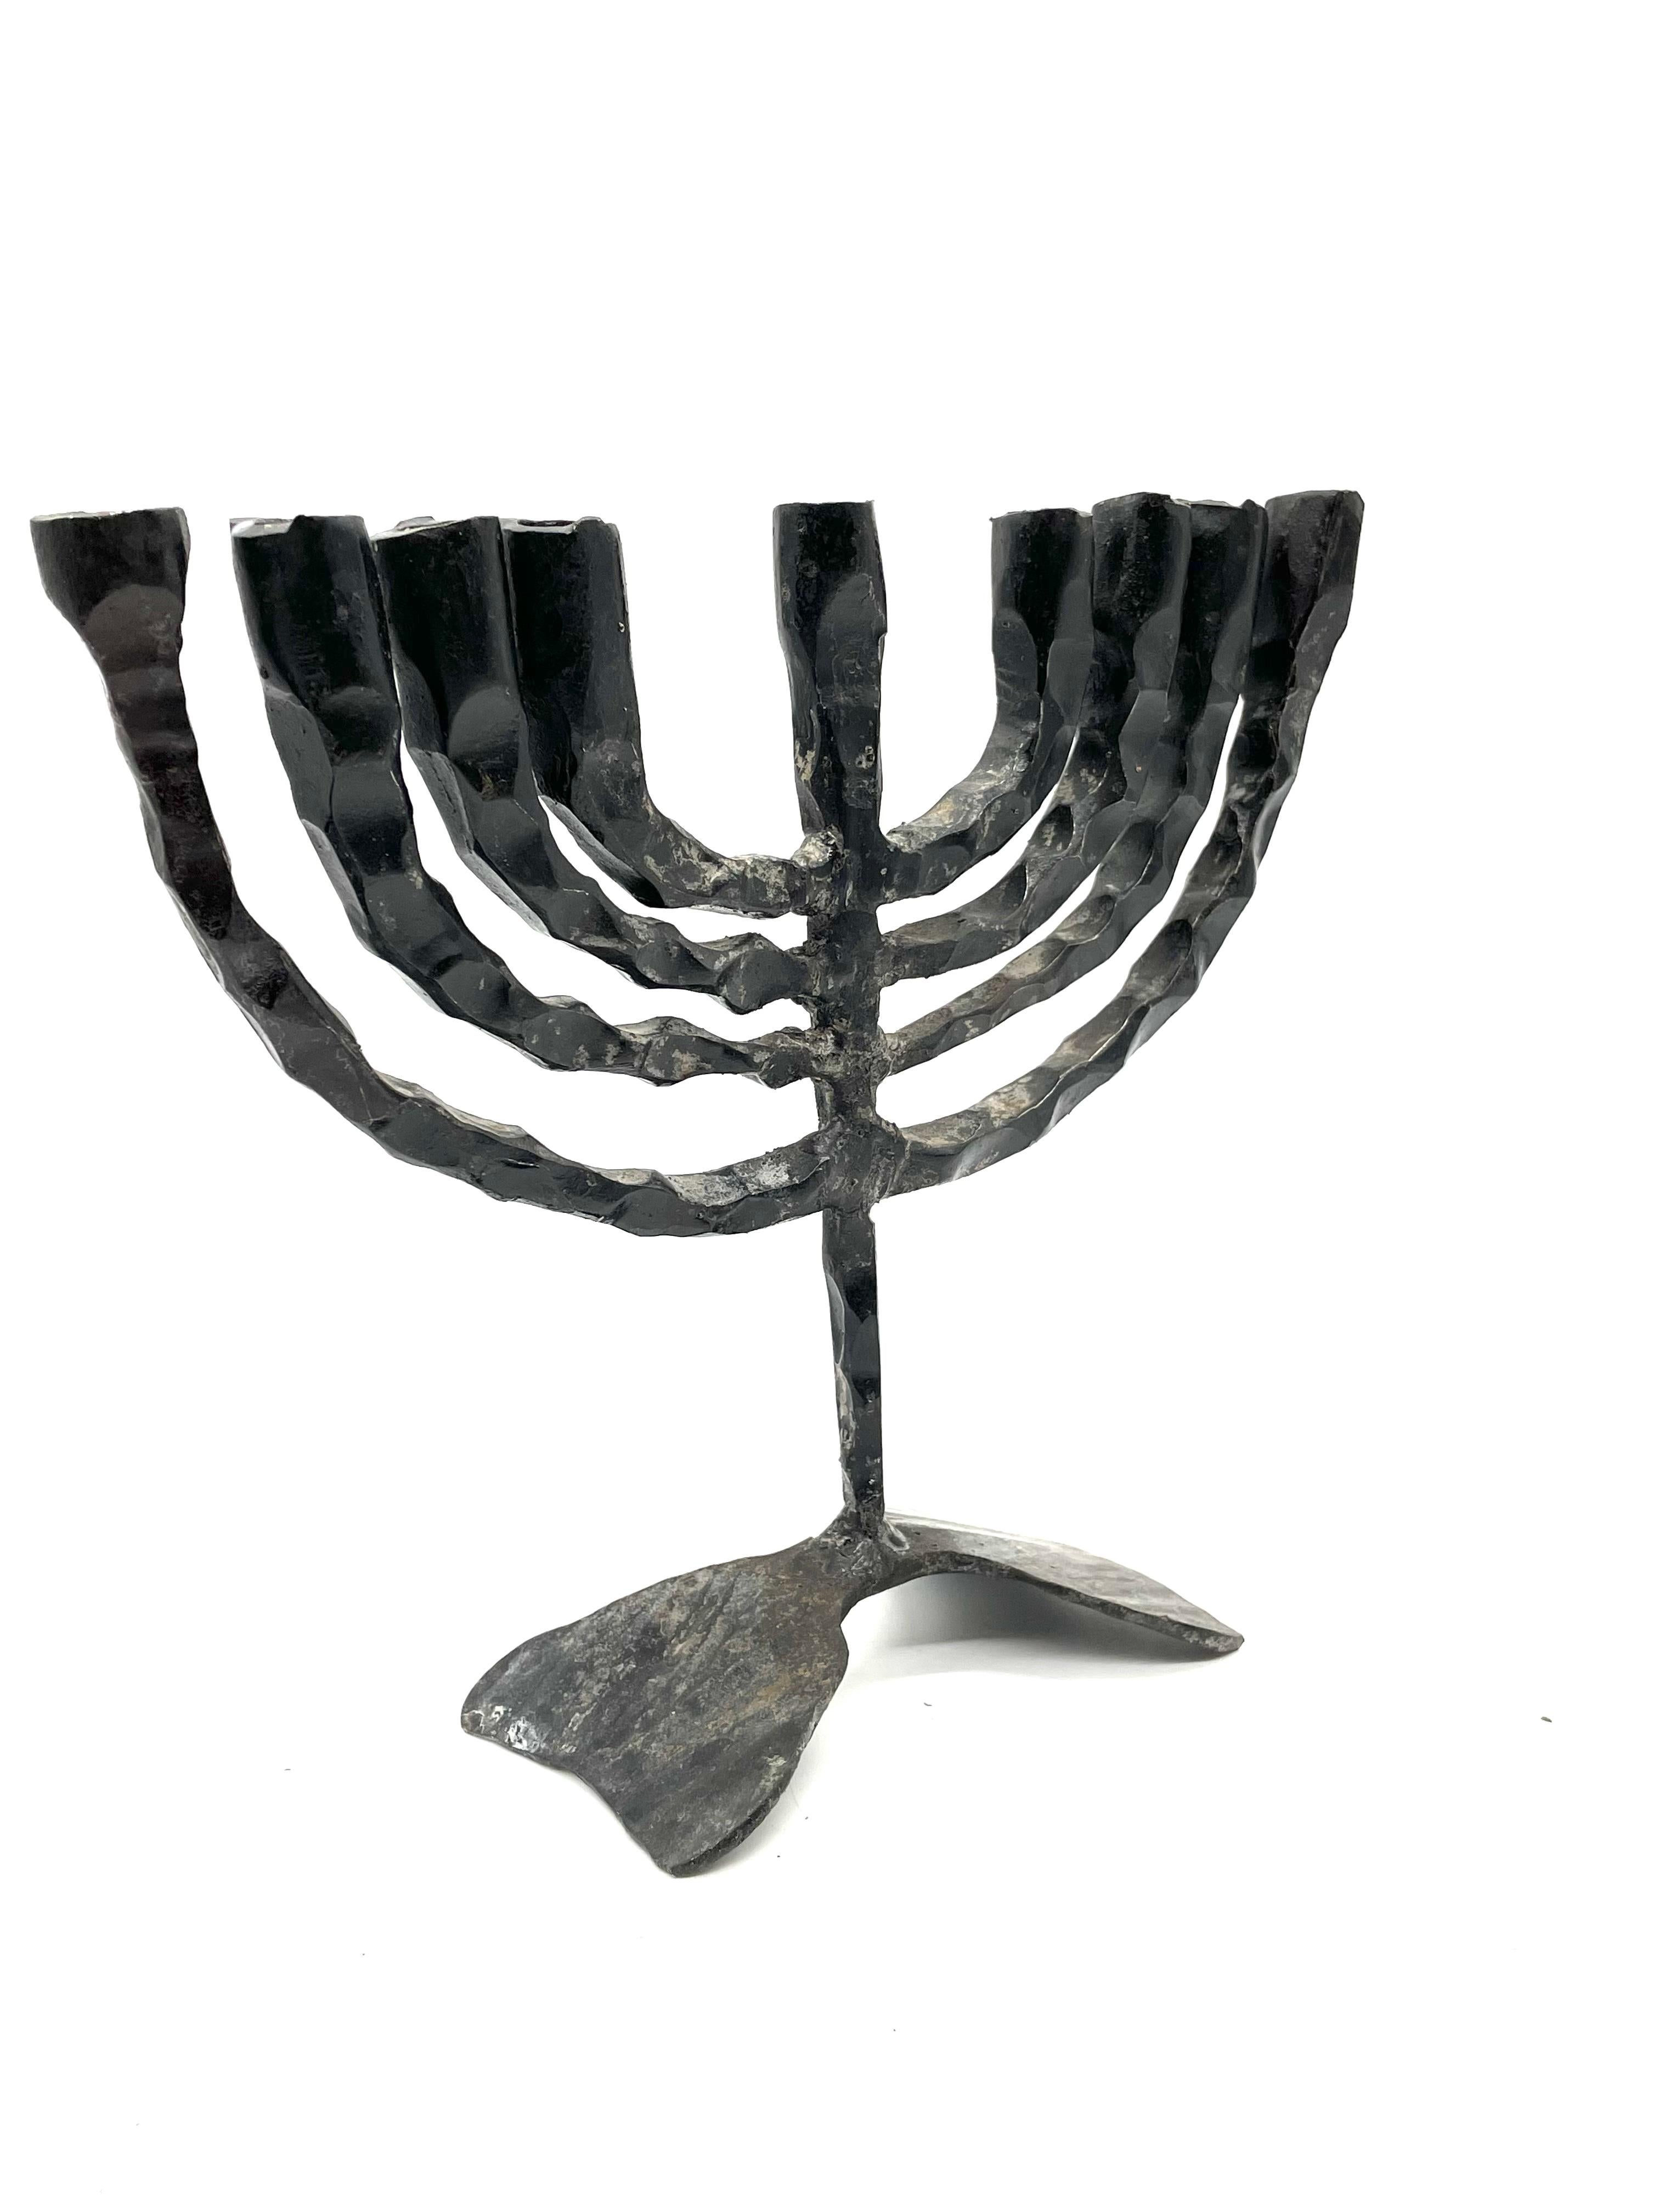 An impressive hand forged hanukkah lamp inspired by Brutalist aesthetic. Hand crafted in Jerusalem, Israel circa 1960, the iron lamp stands with nine rustic candleholders in traditional style. The middle candleholder, shamash, stands upright with